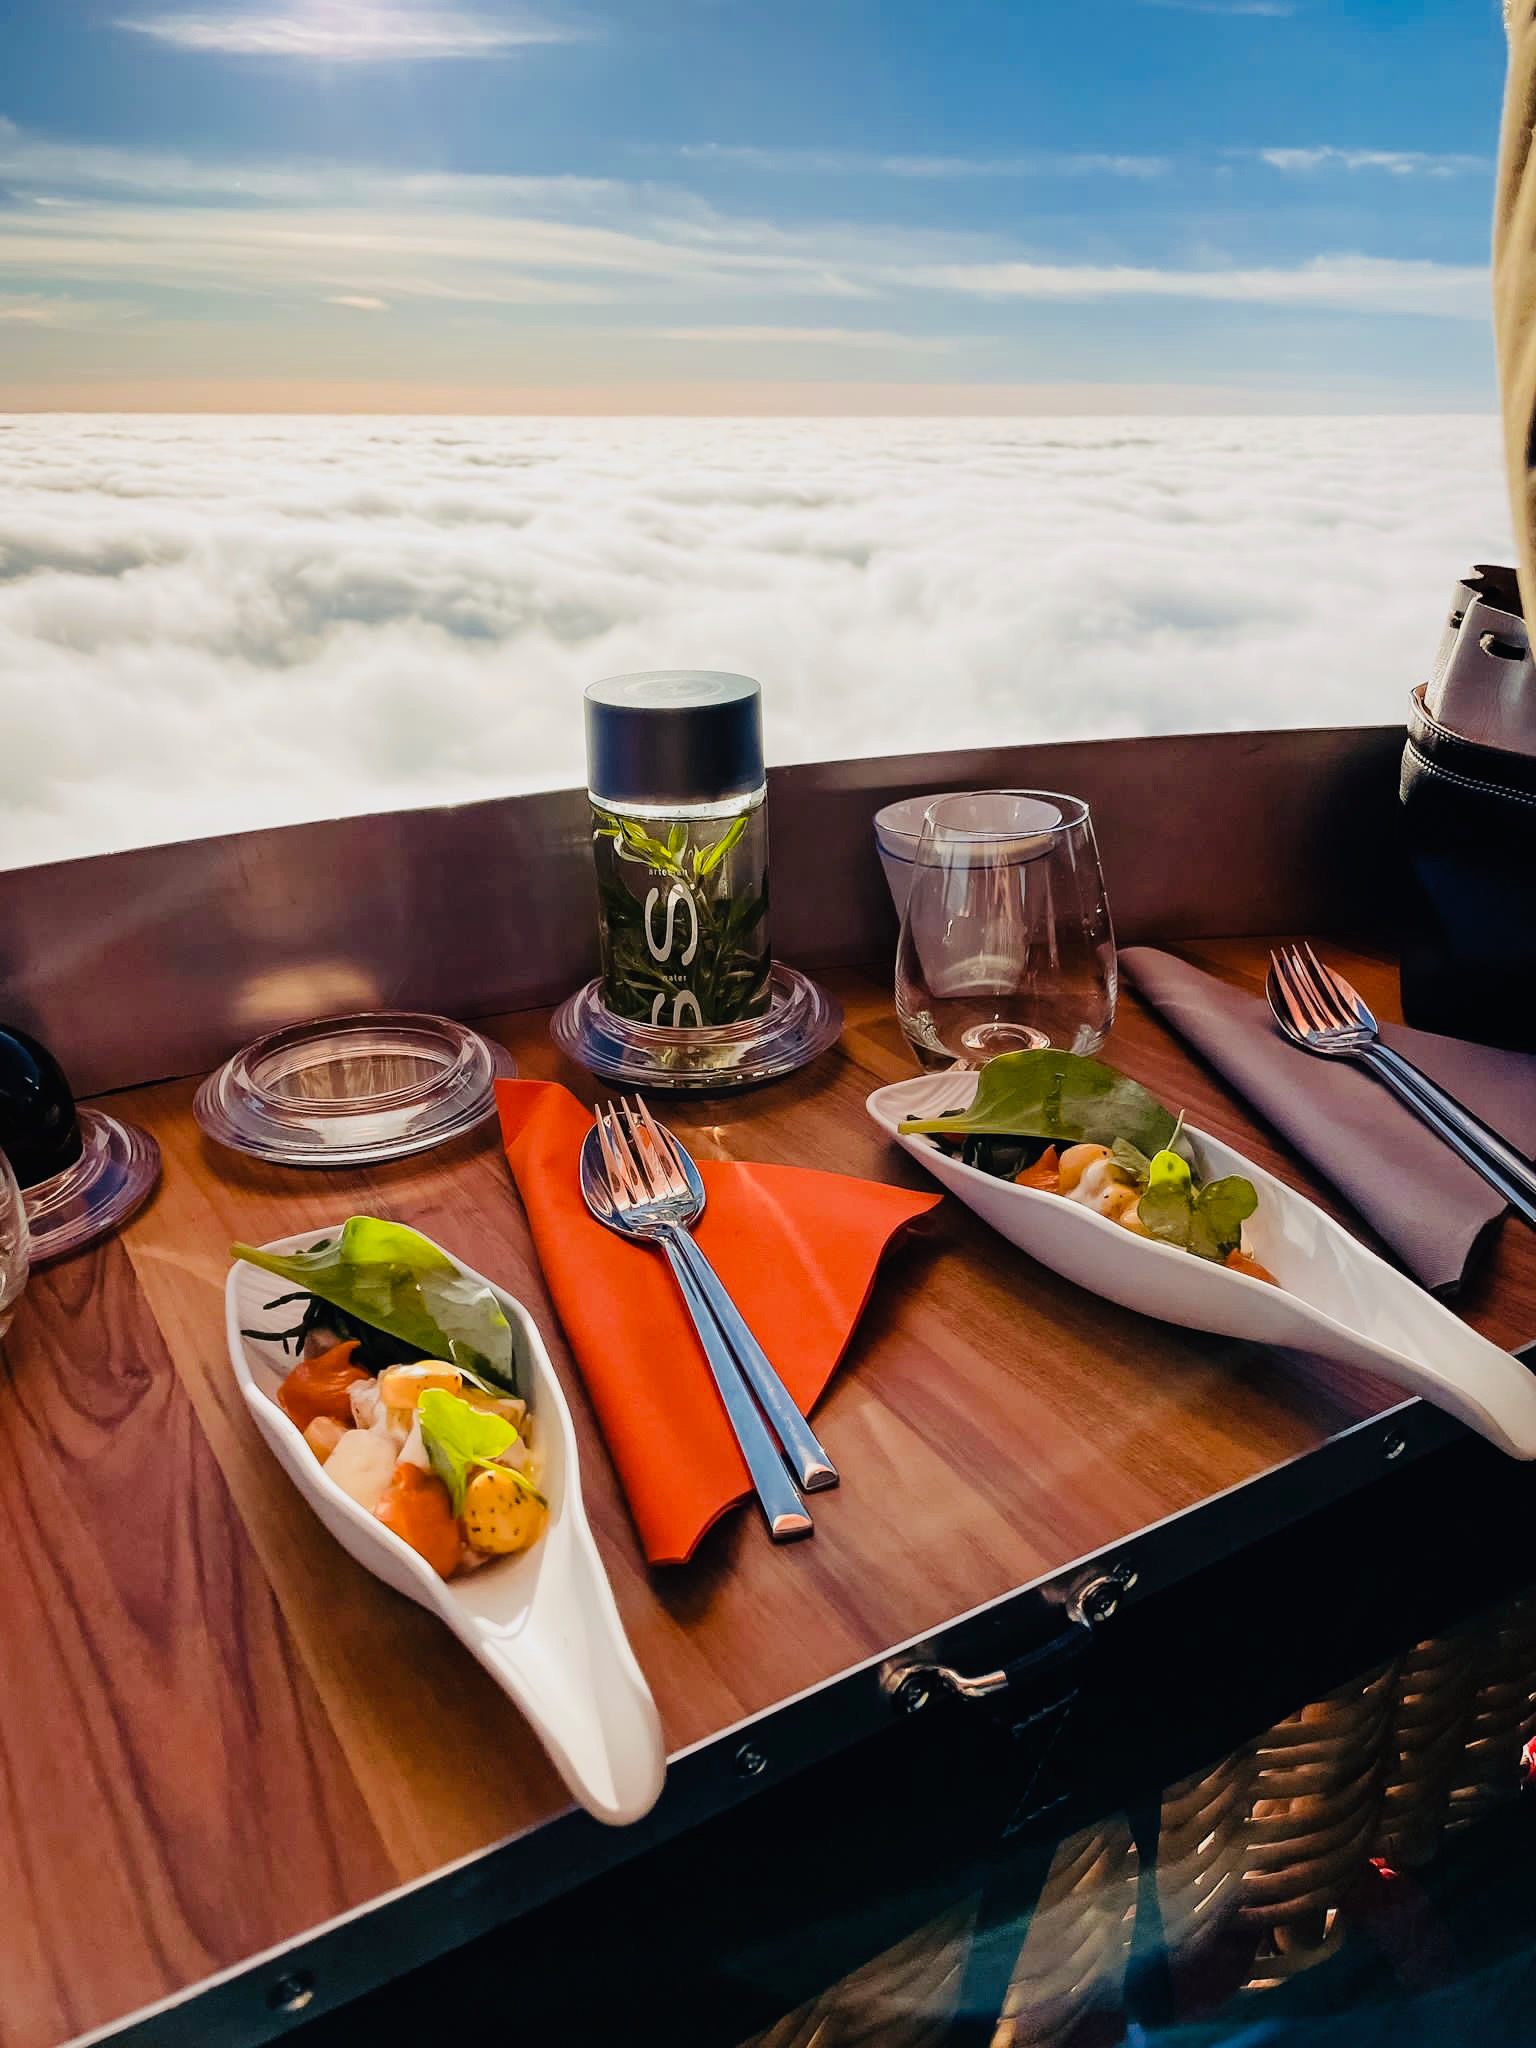 Diners can eat their meal overlooking the clouds.